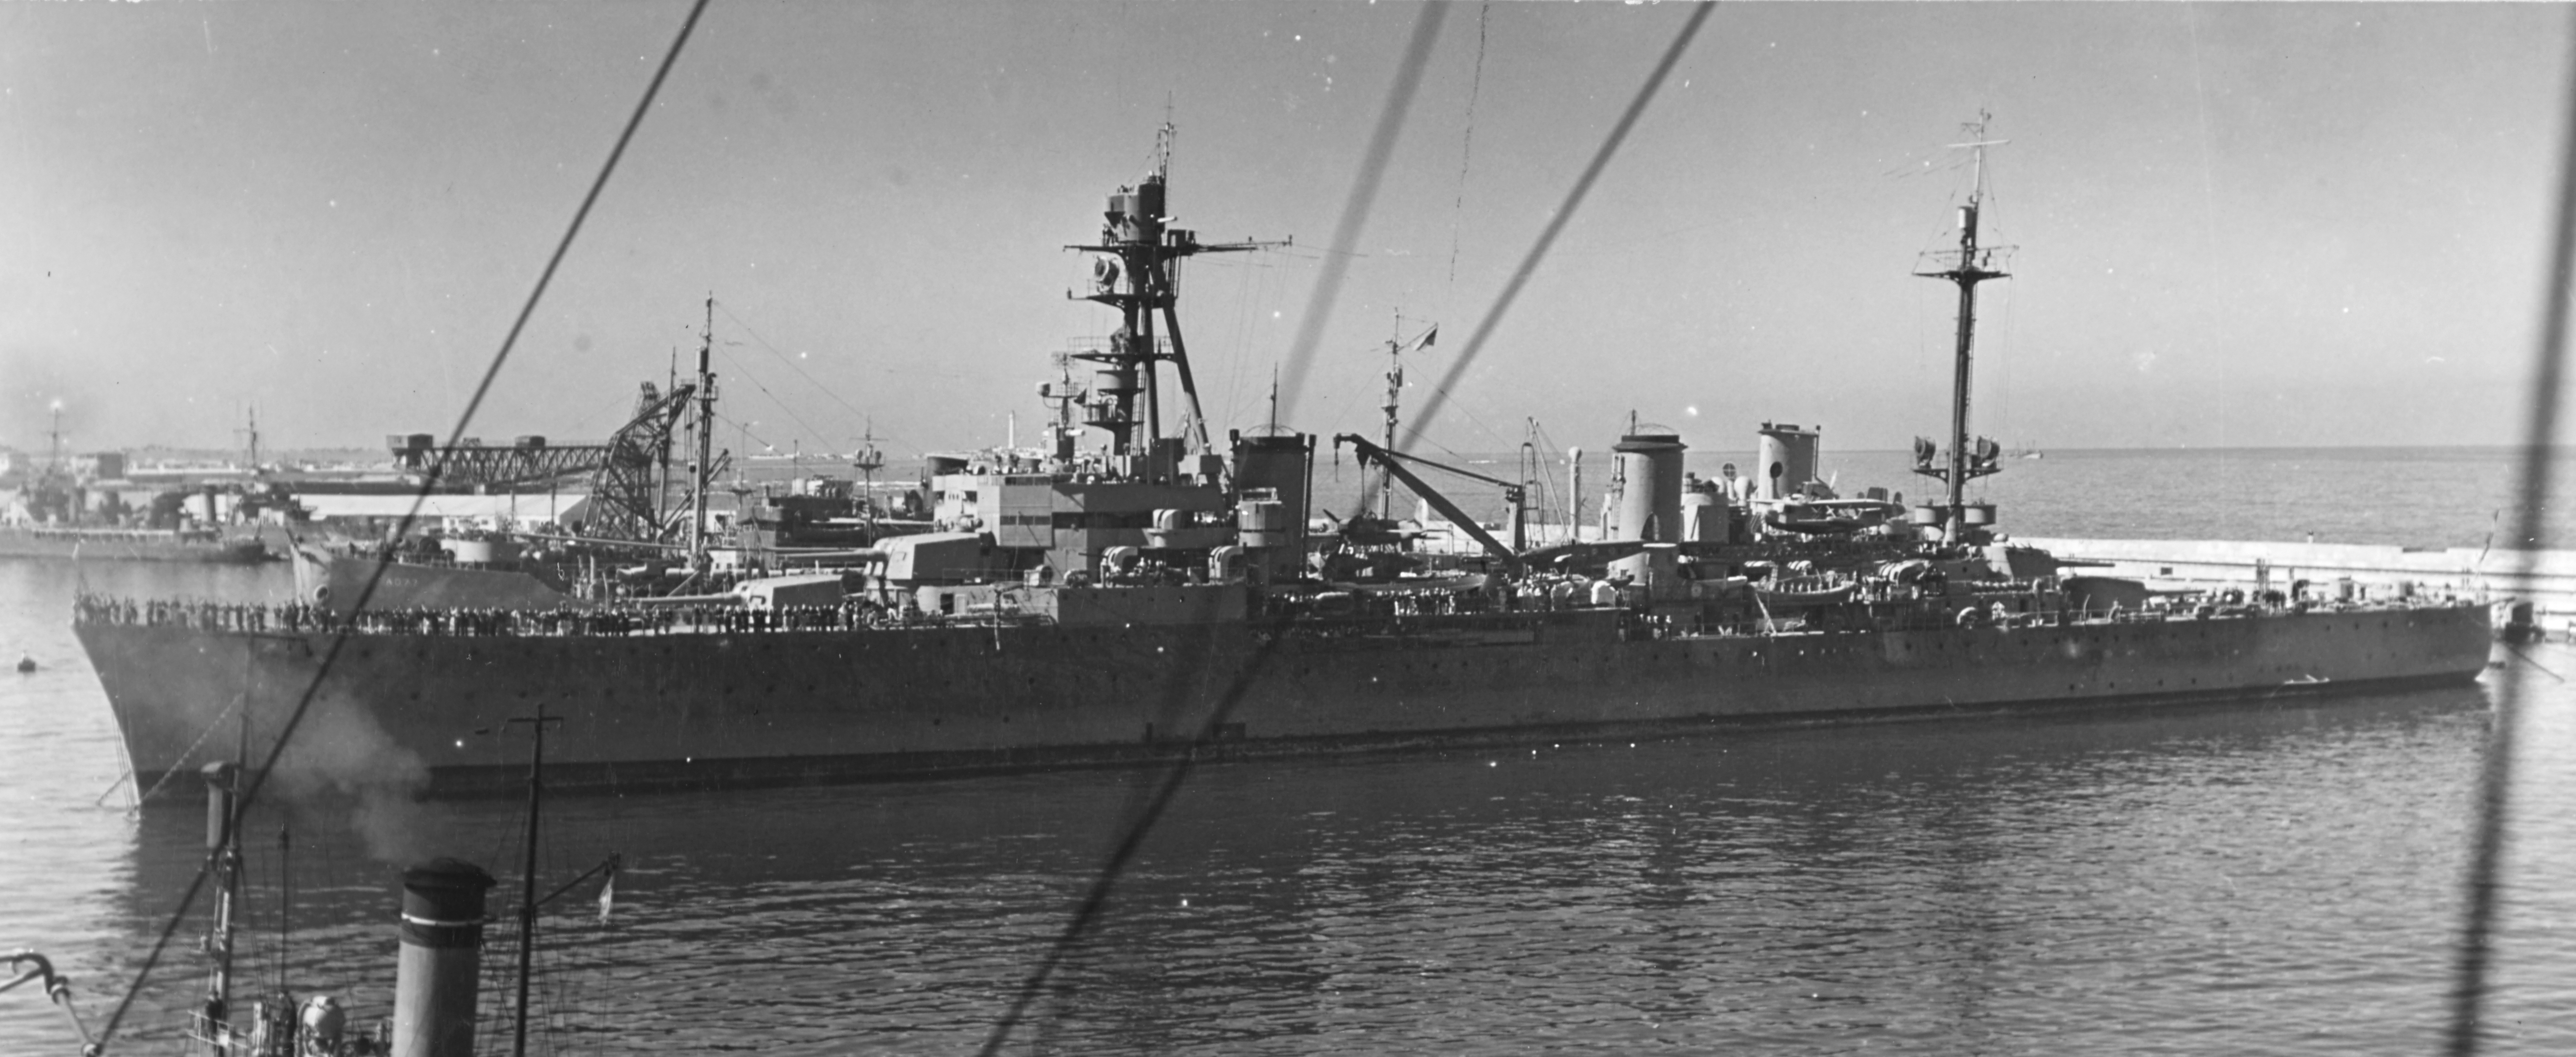 Tourville at Casablanca, Morocco, circa Aug-Nov 1943; note Loire 130 flying boat and wo Latécoère 298 floatplanes stowed between the stacks, USS Cossatot and other French ships in background